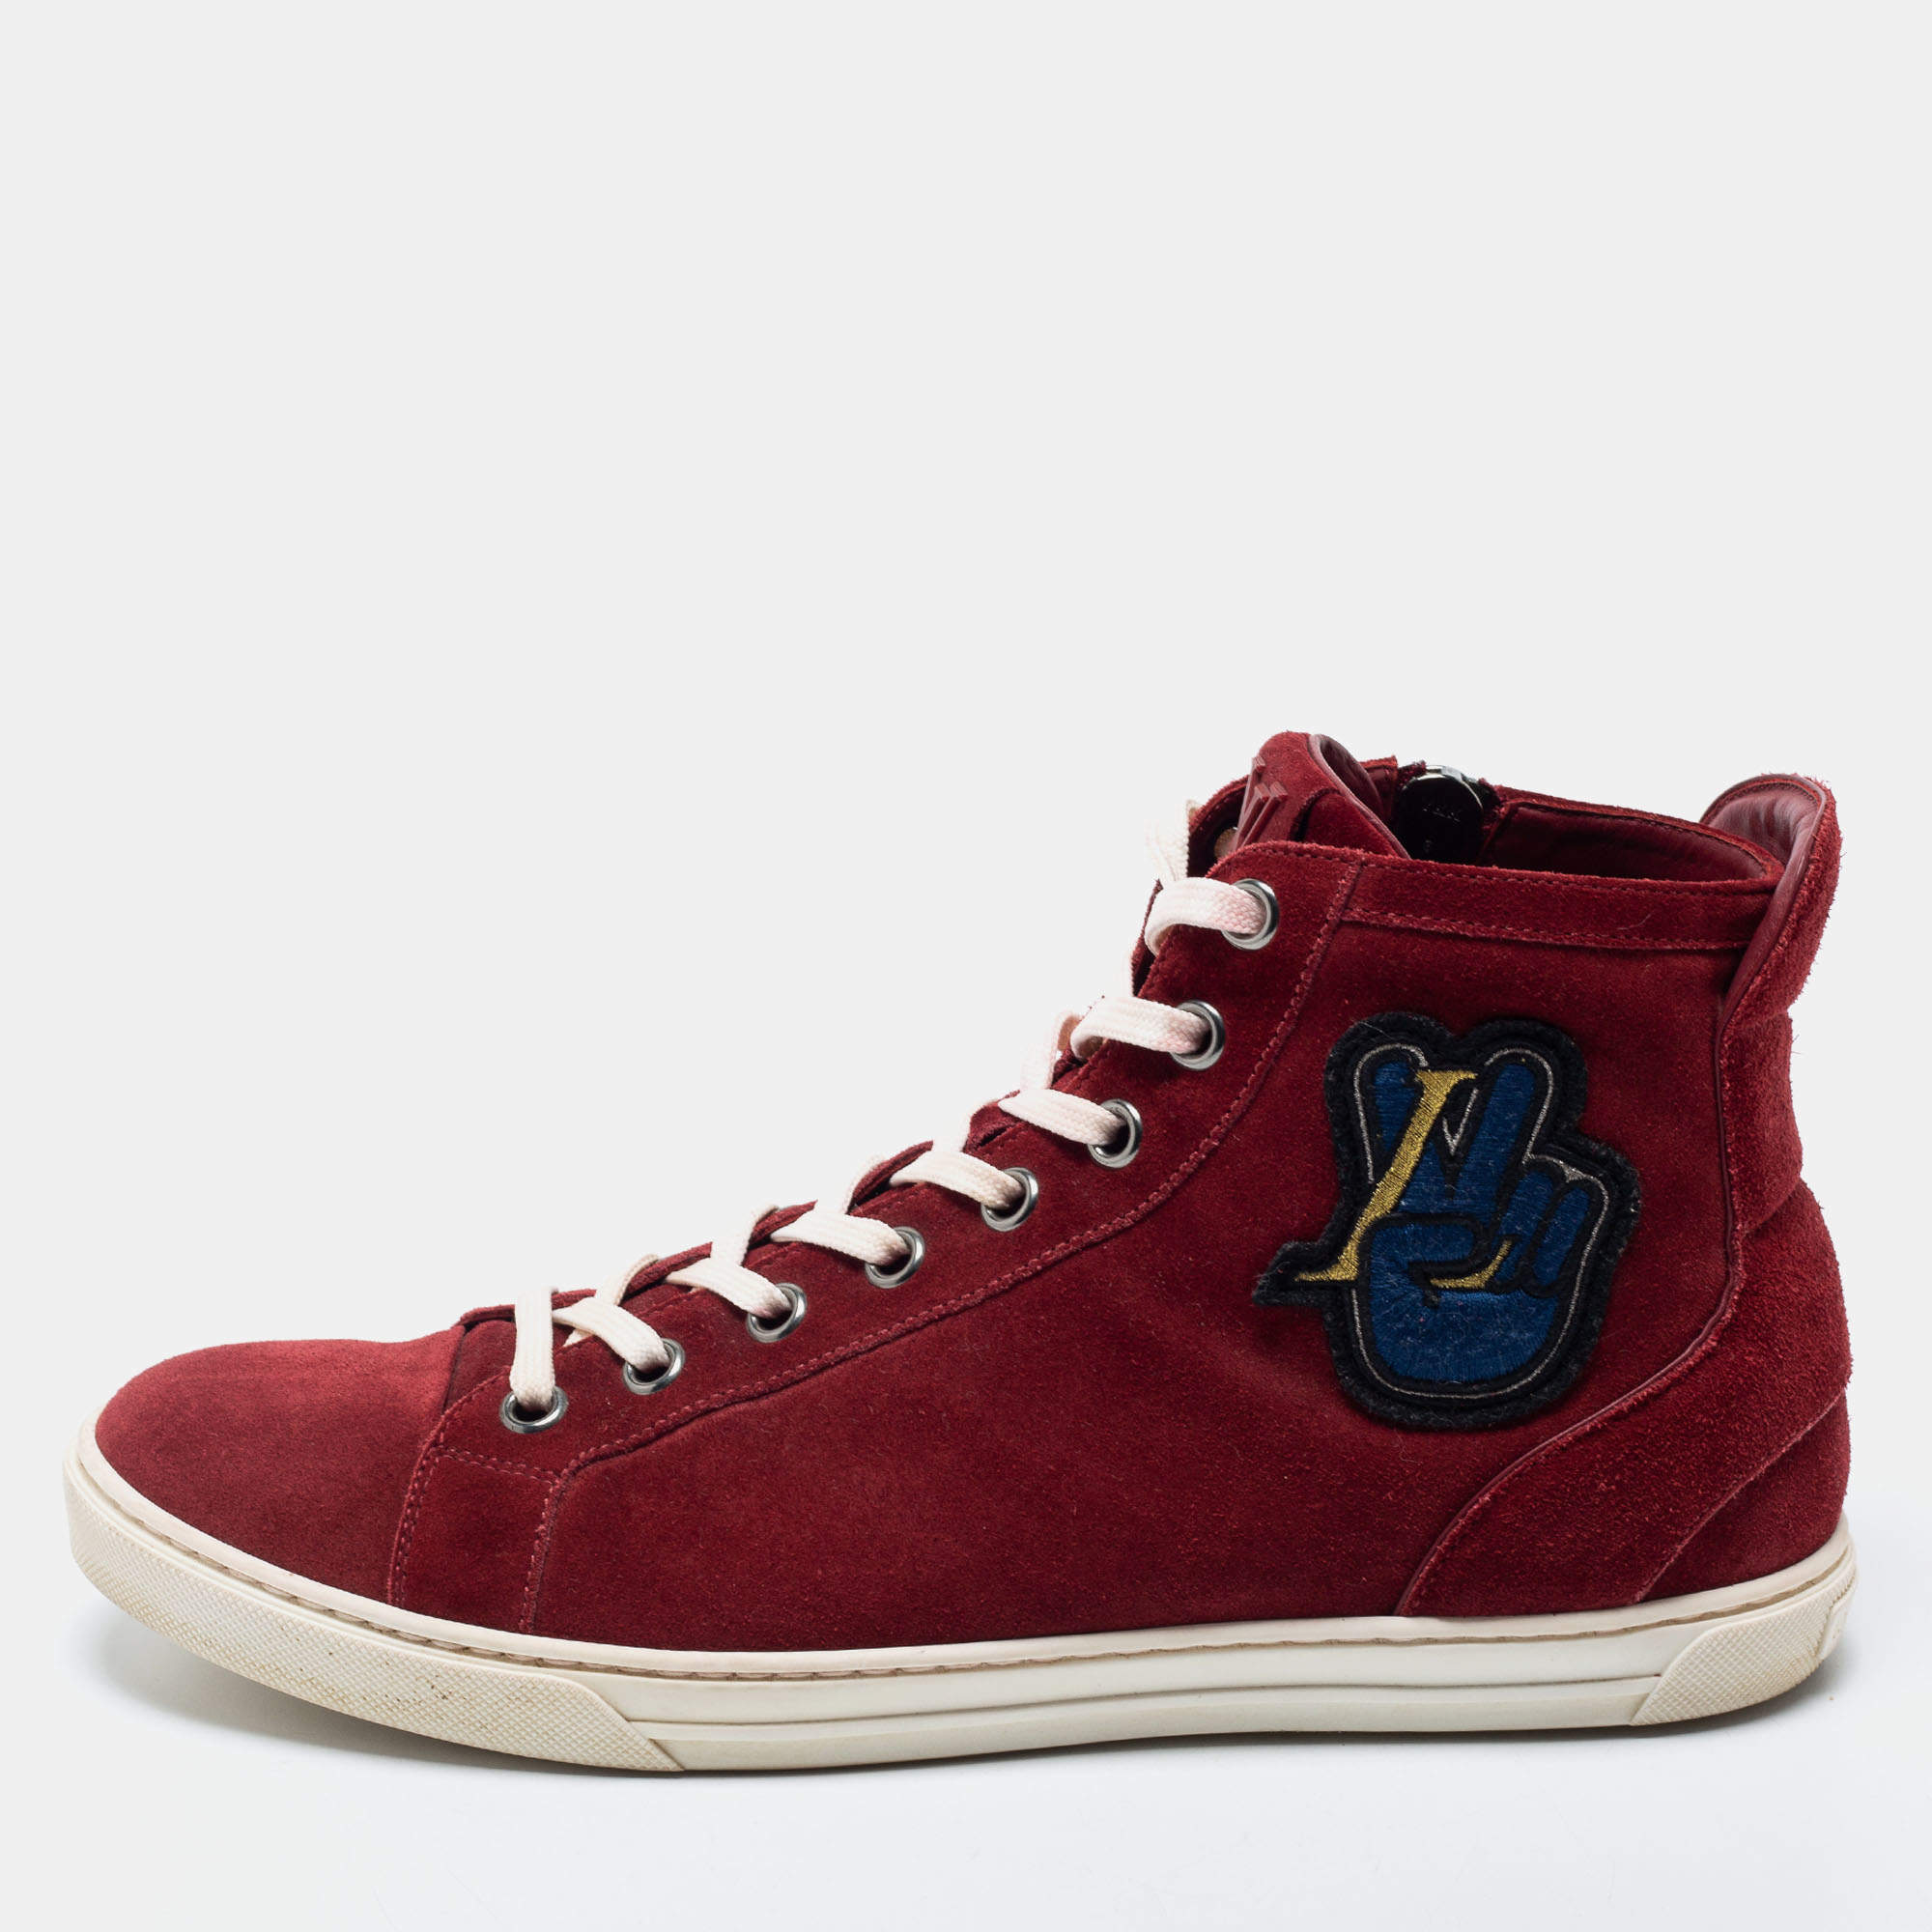 Louis Vuitton Red Suede High Top Sneakers Size 43 Louis Vuitton